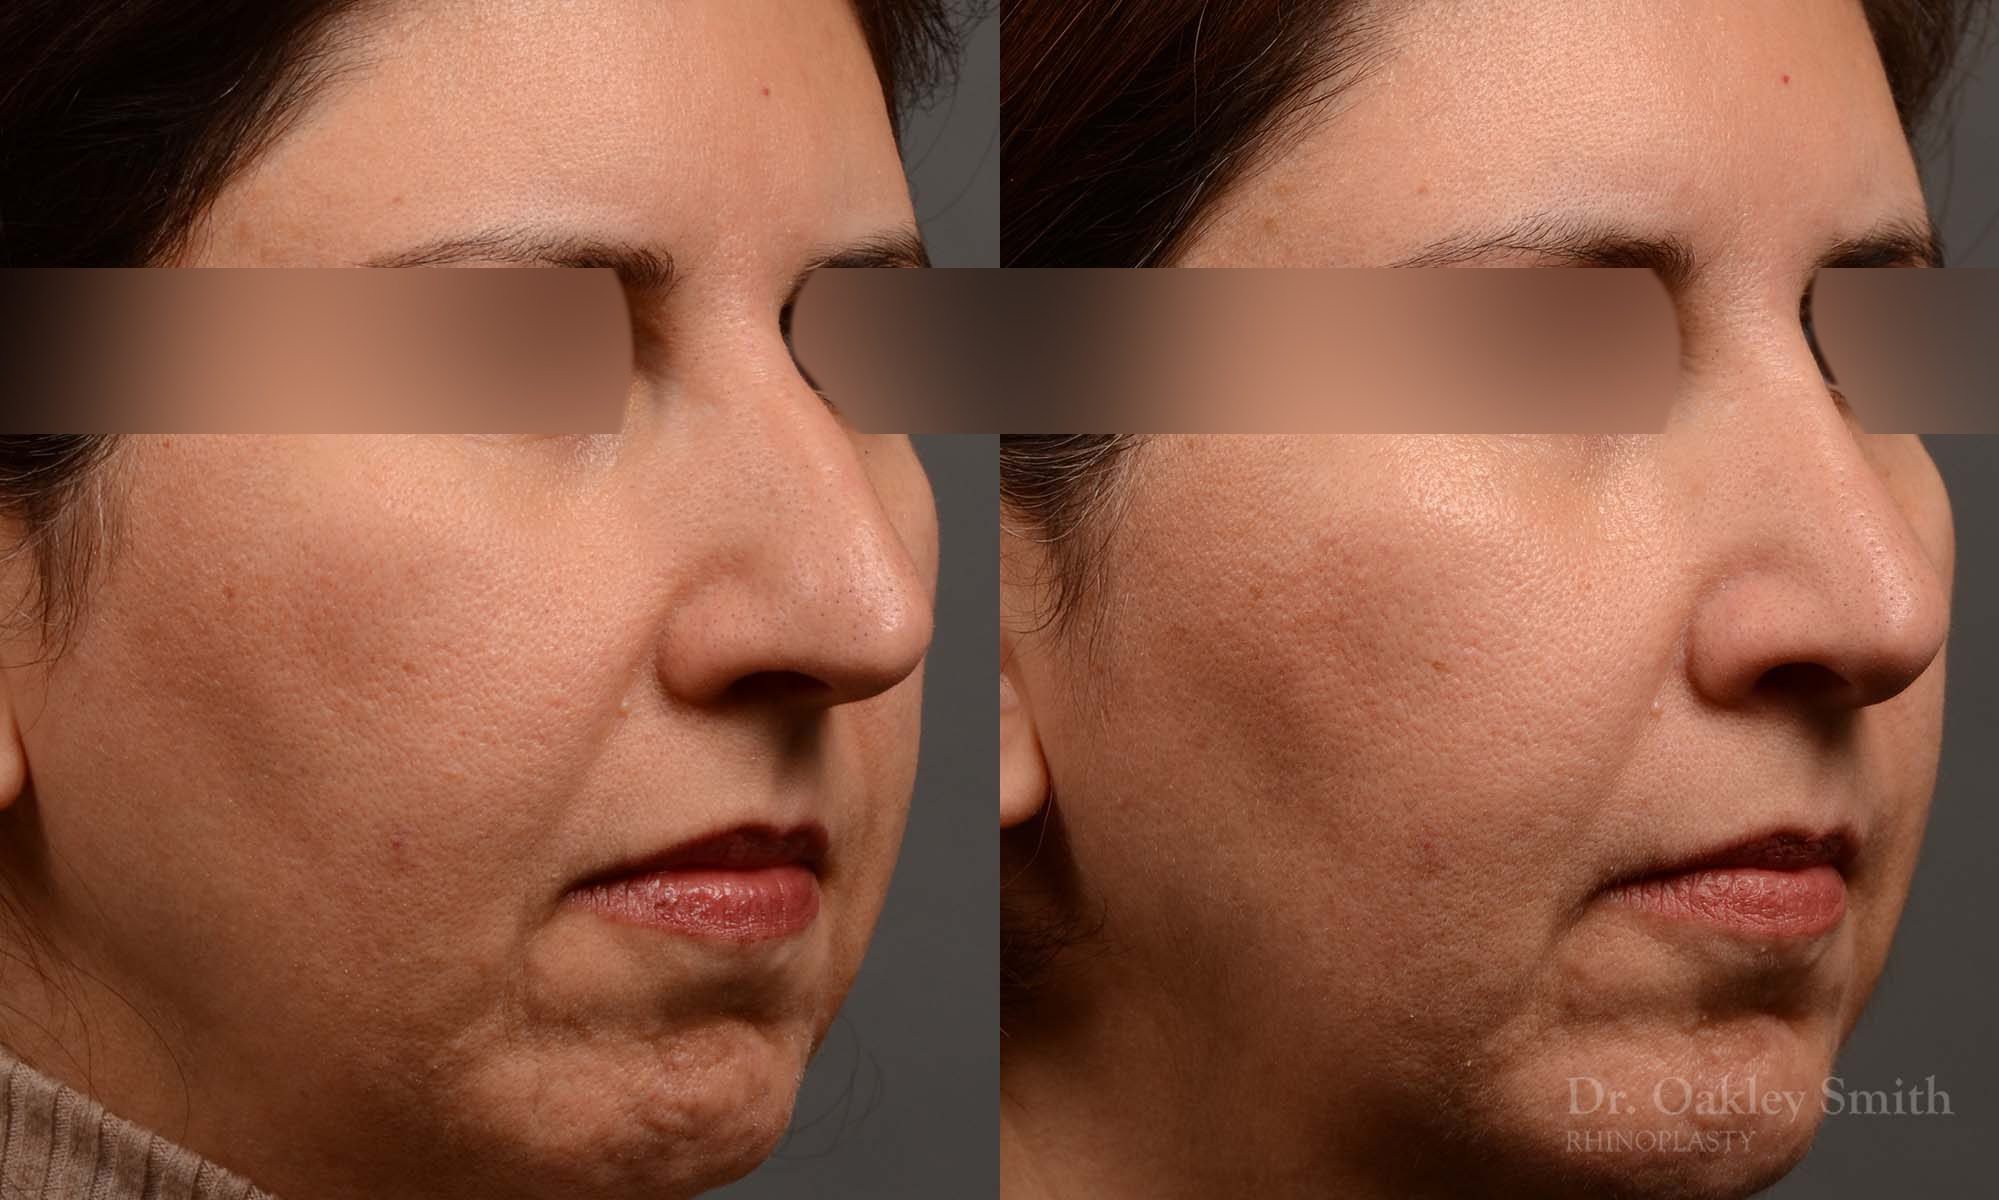 Hump Reduction, Rhinoplasty - Rhinoplasty Before and After Case 372